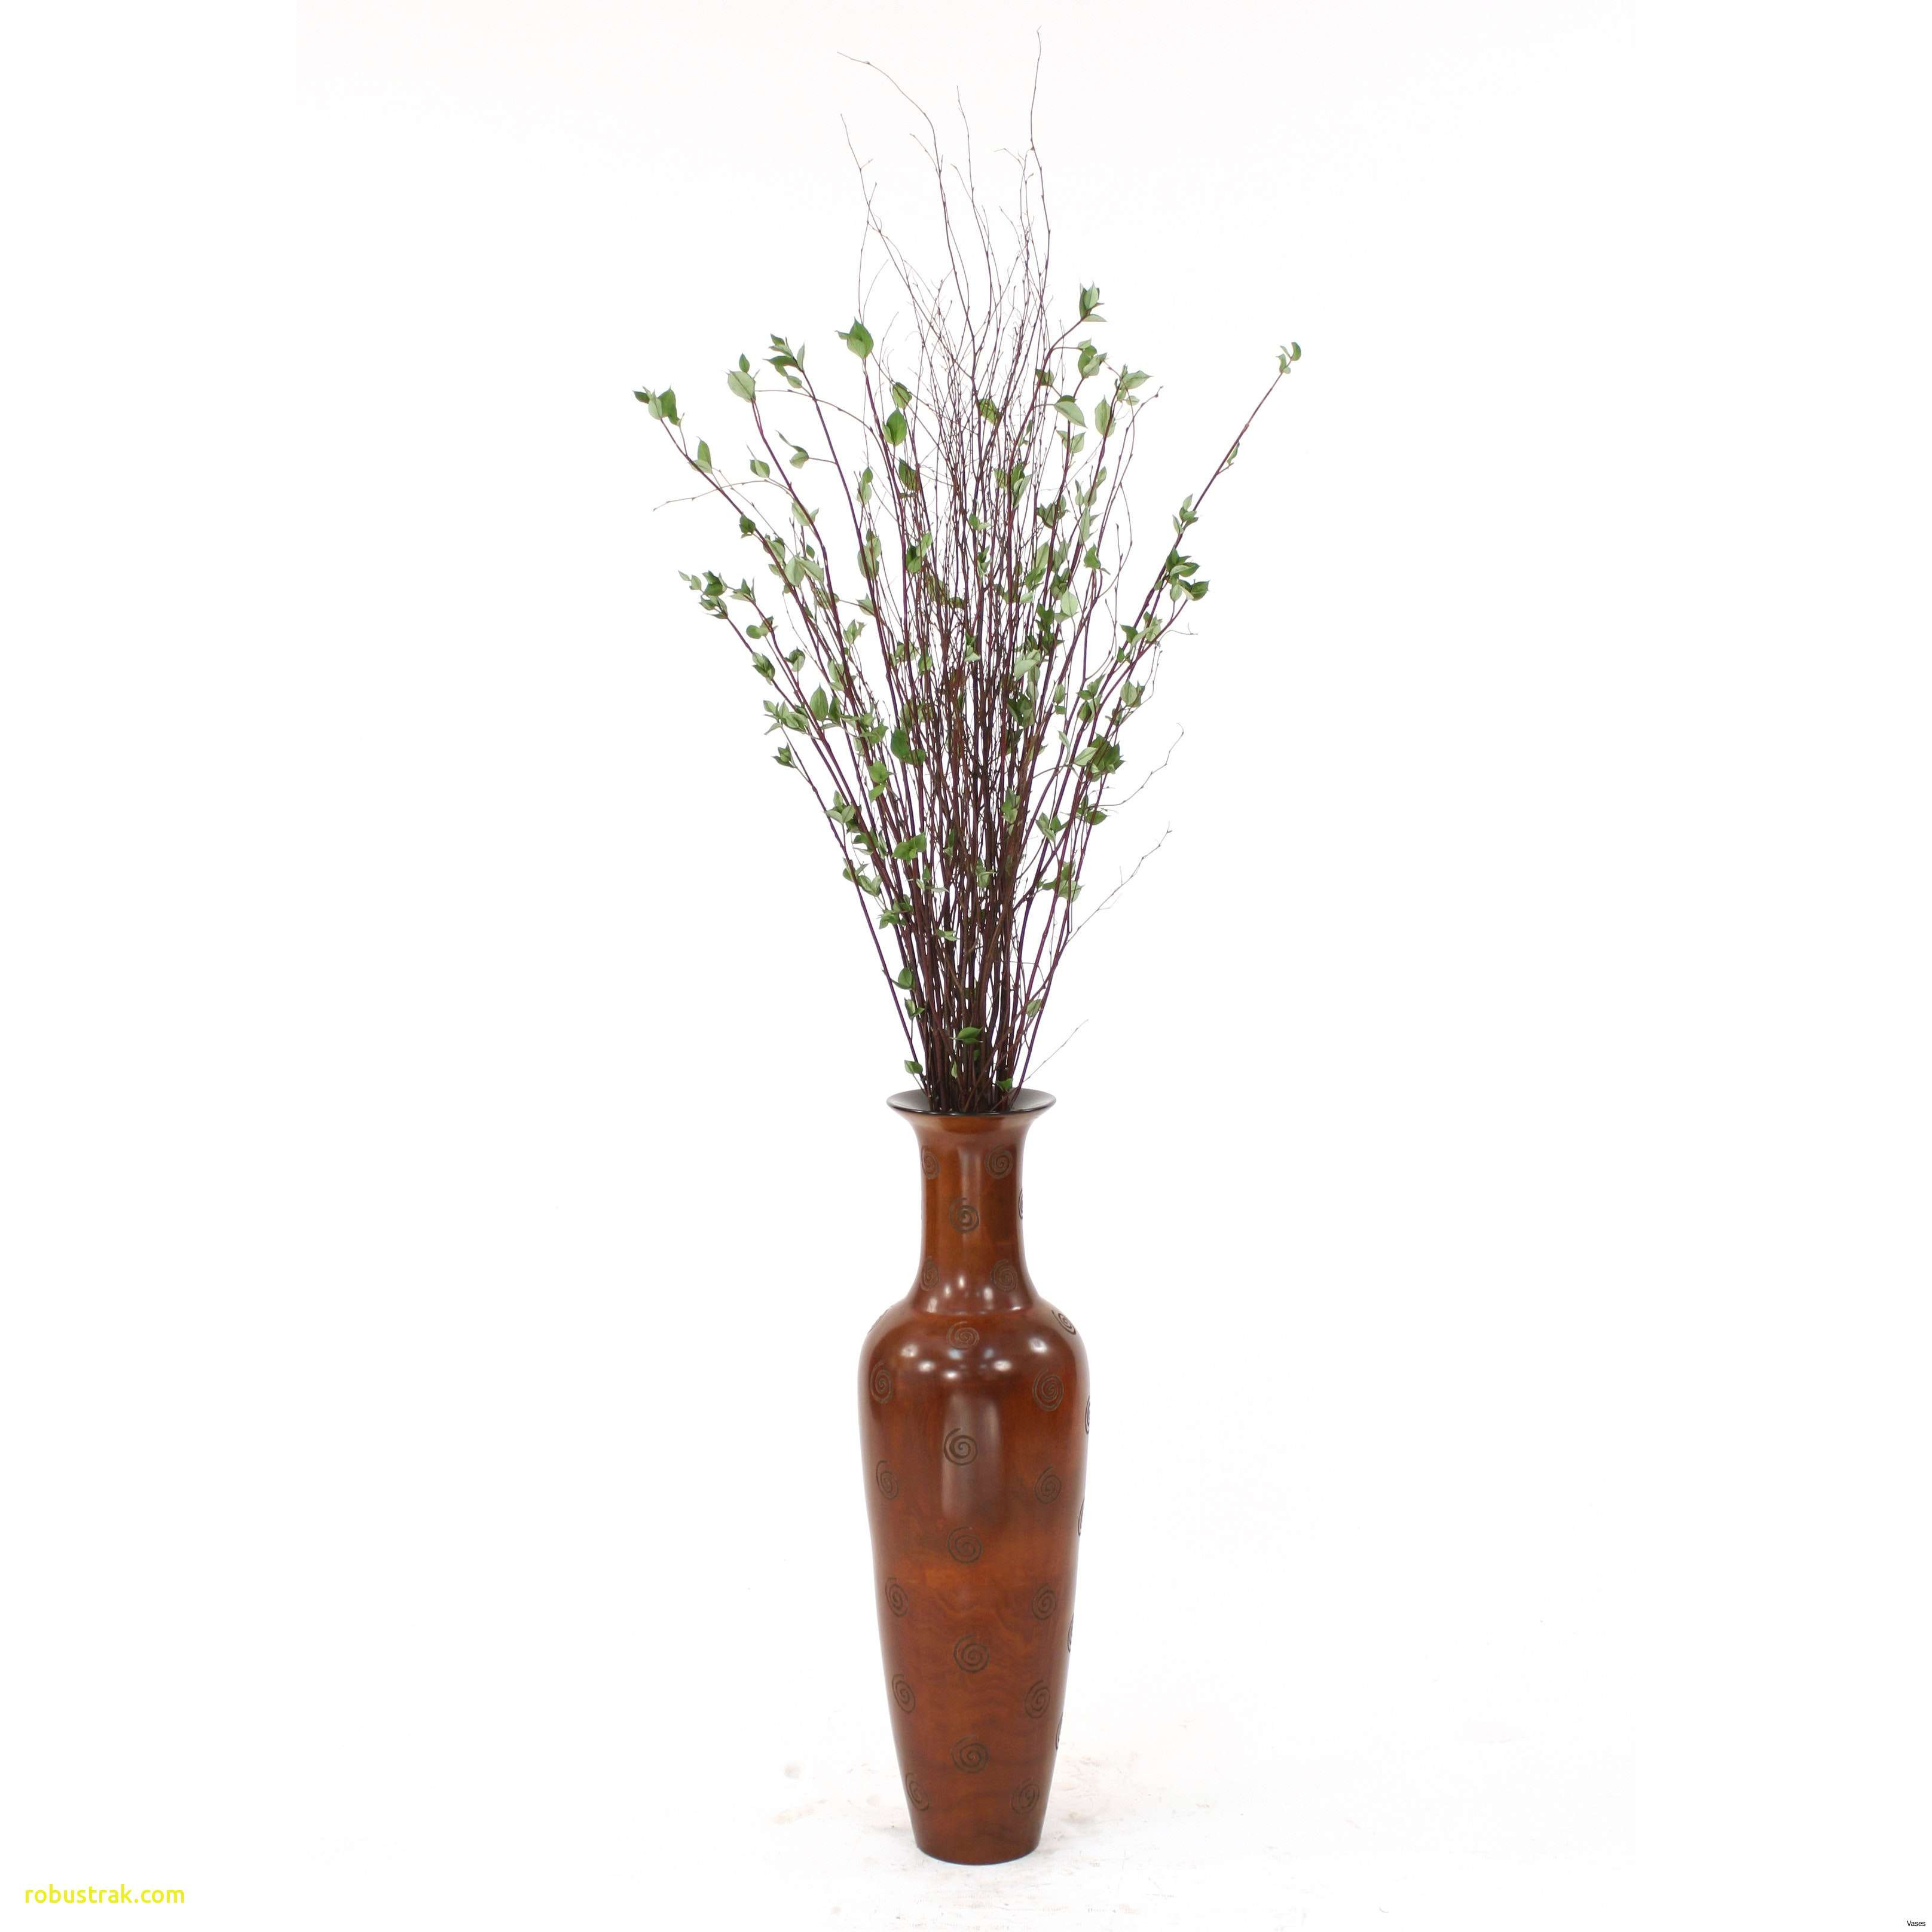 10 Amazing Cut Out Vase 2024 free download cut out vase of decor sticks in a vase lovely vases decorative sticks in vase red intended for decor sticks in a vase lovely vases decorative sticks in vase red a i 0d for bamboo floor